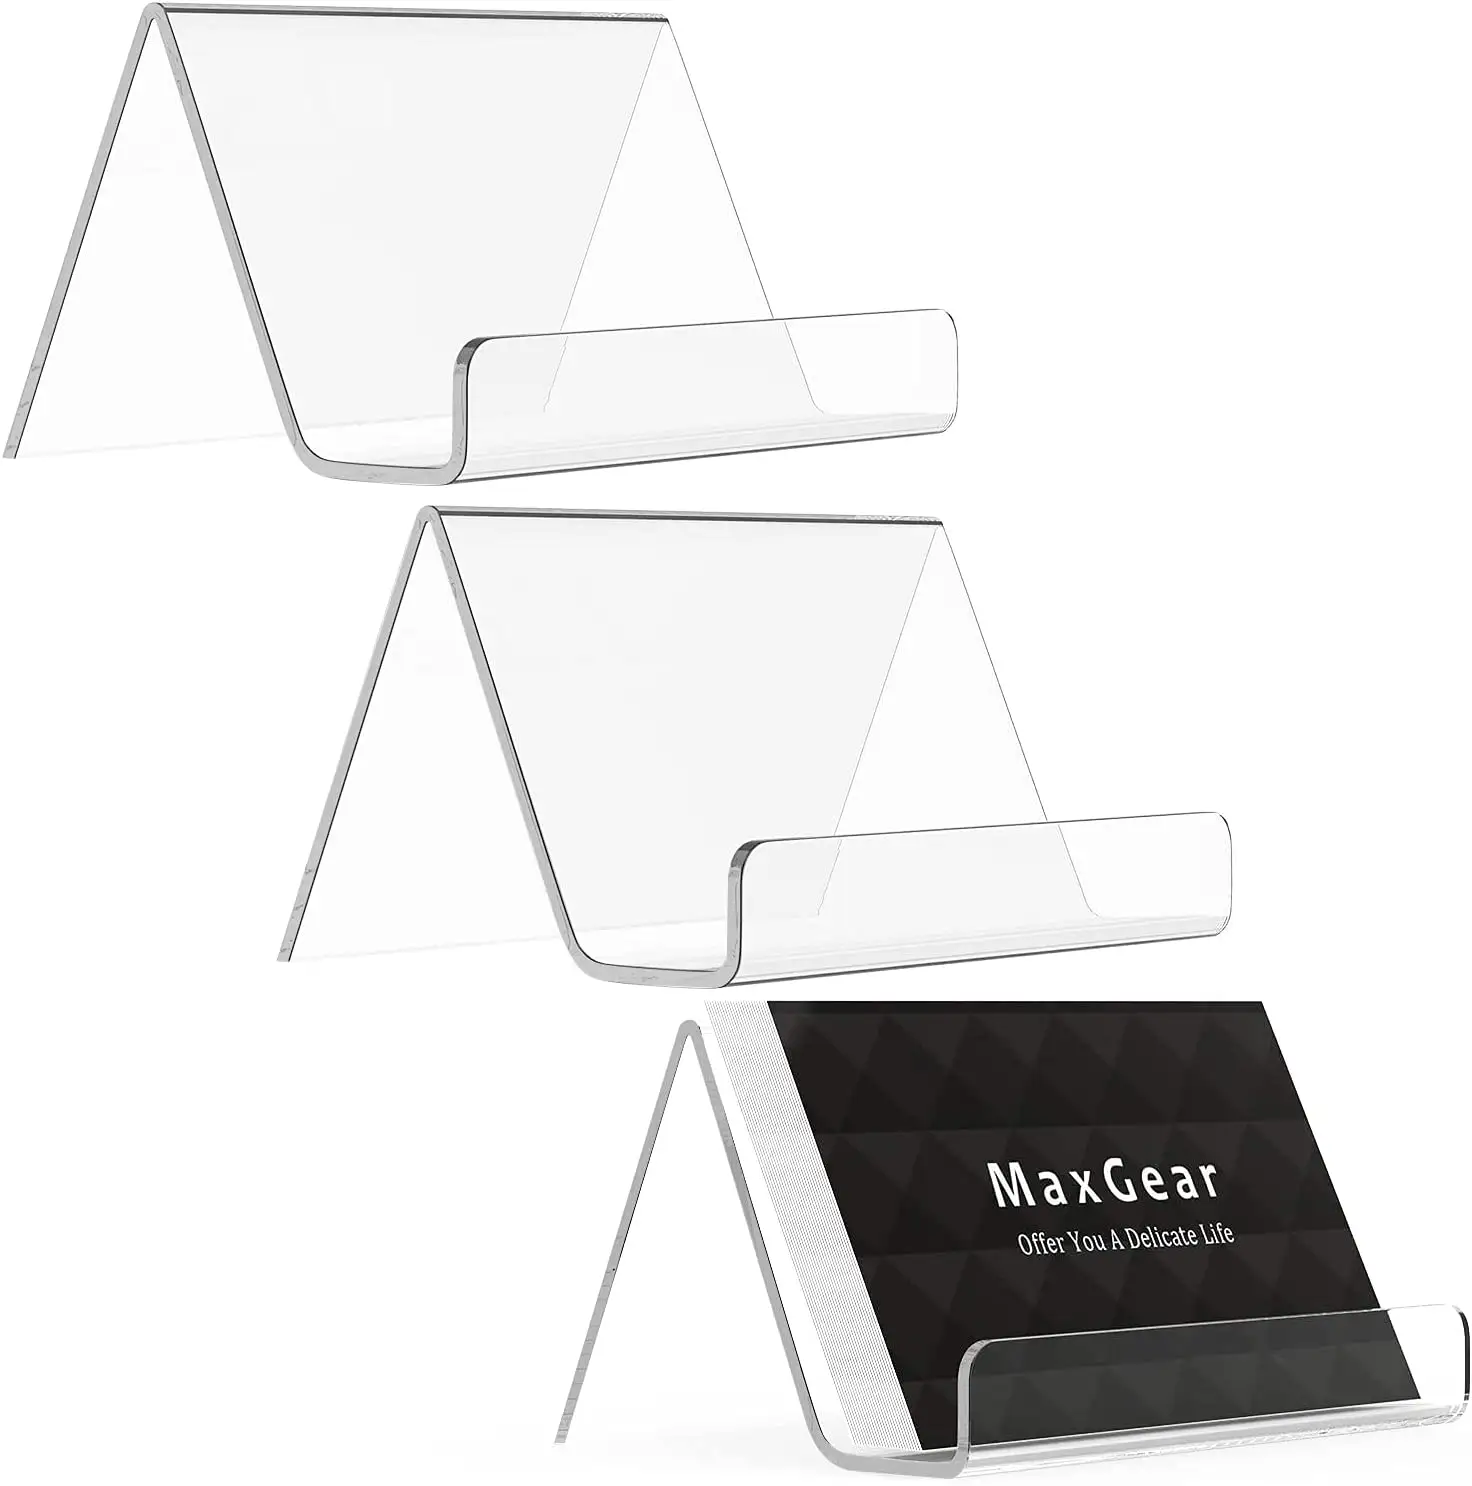 Business Card Holder for Desk Acrylic Business Card Display Holders Clear Cell Phone Holder Stand 3 Pack